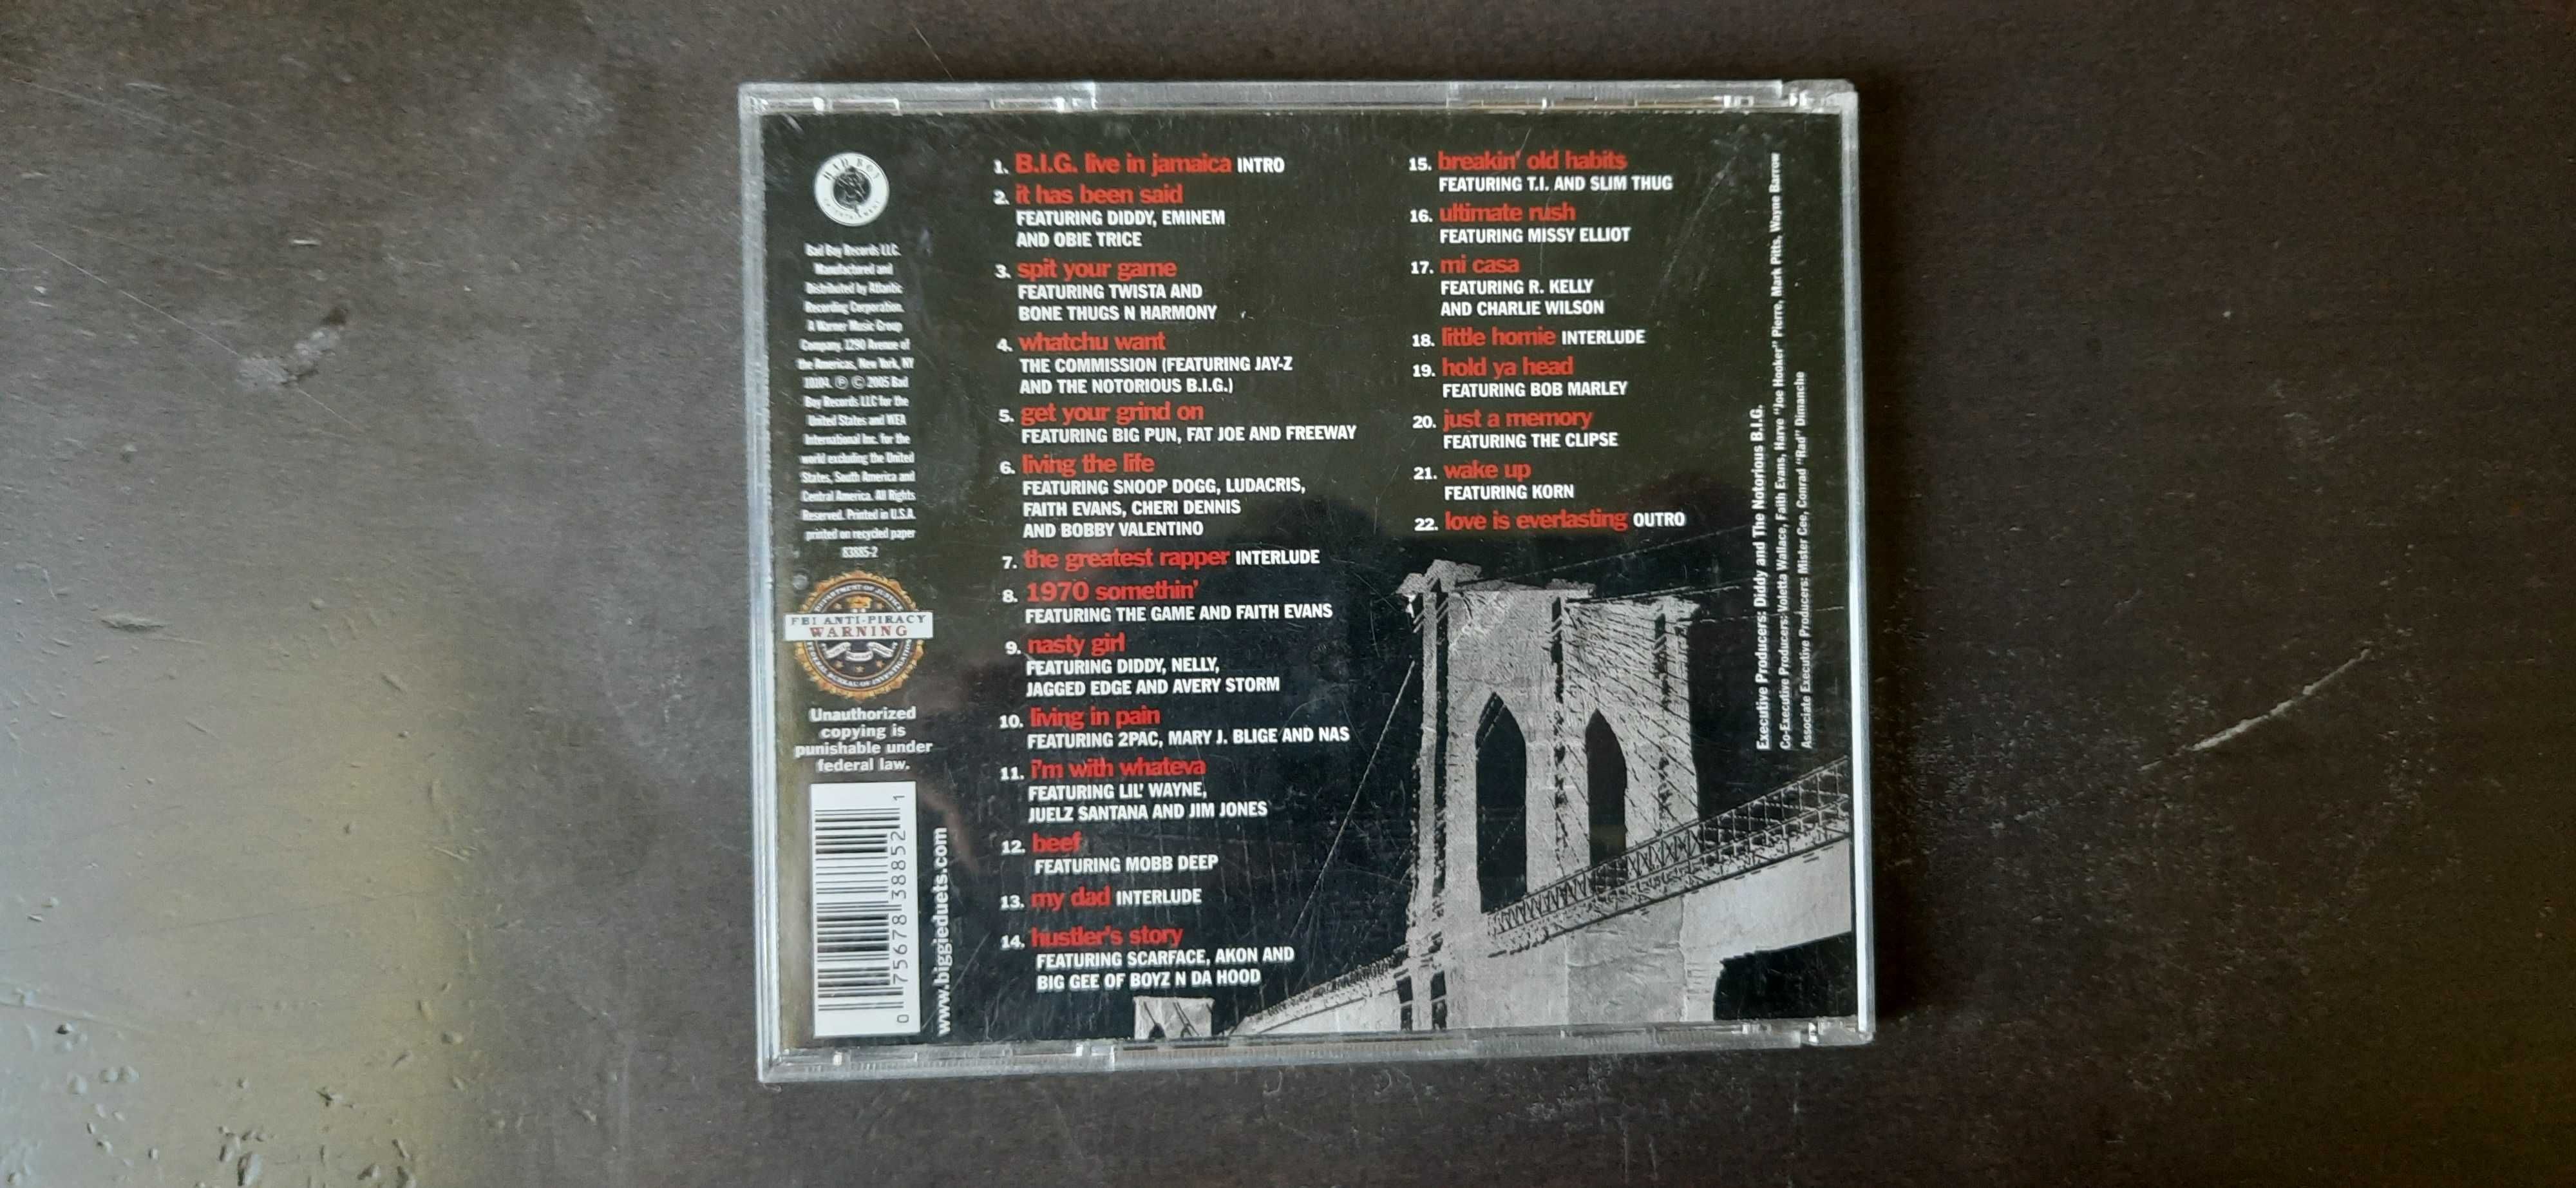 The Notorious B.I.G.* - Duets (The Final Chapter)
CD